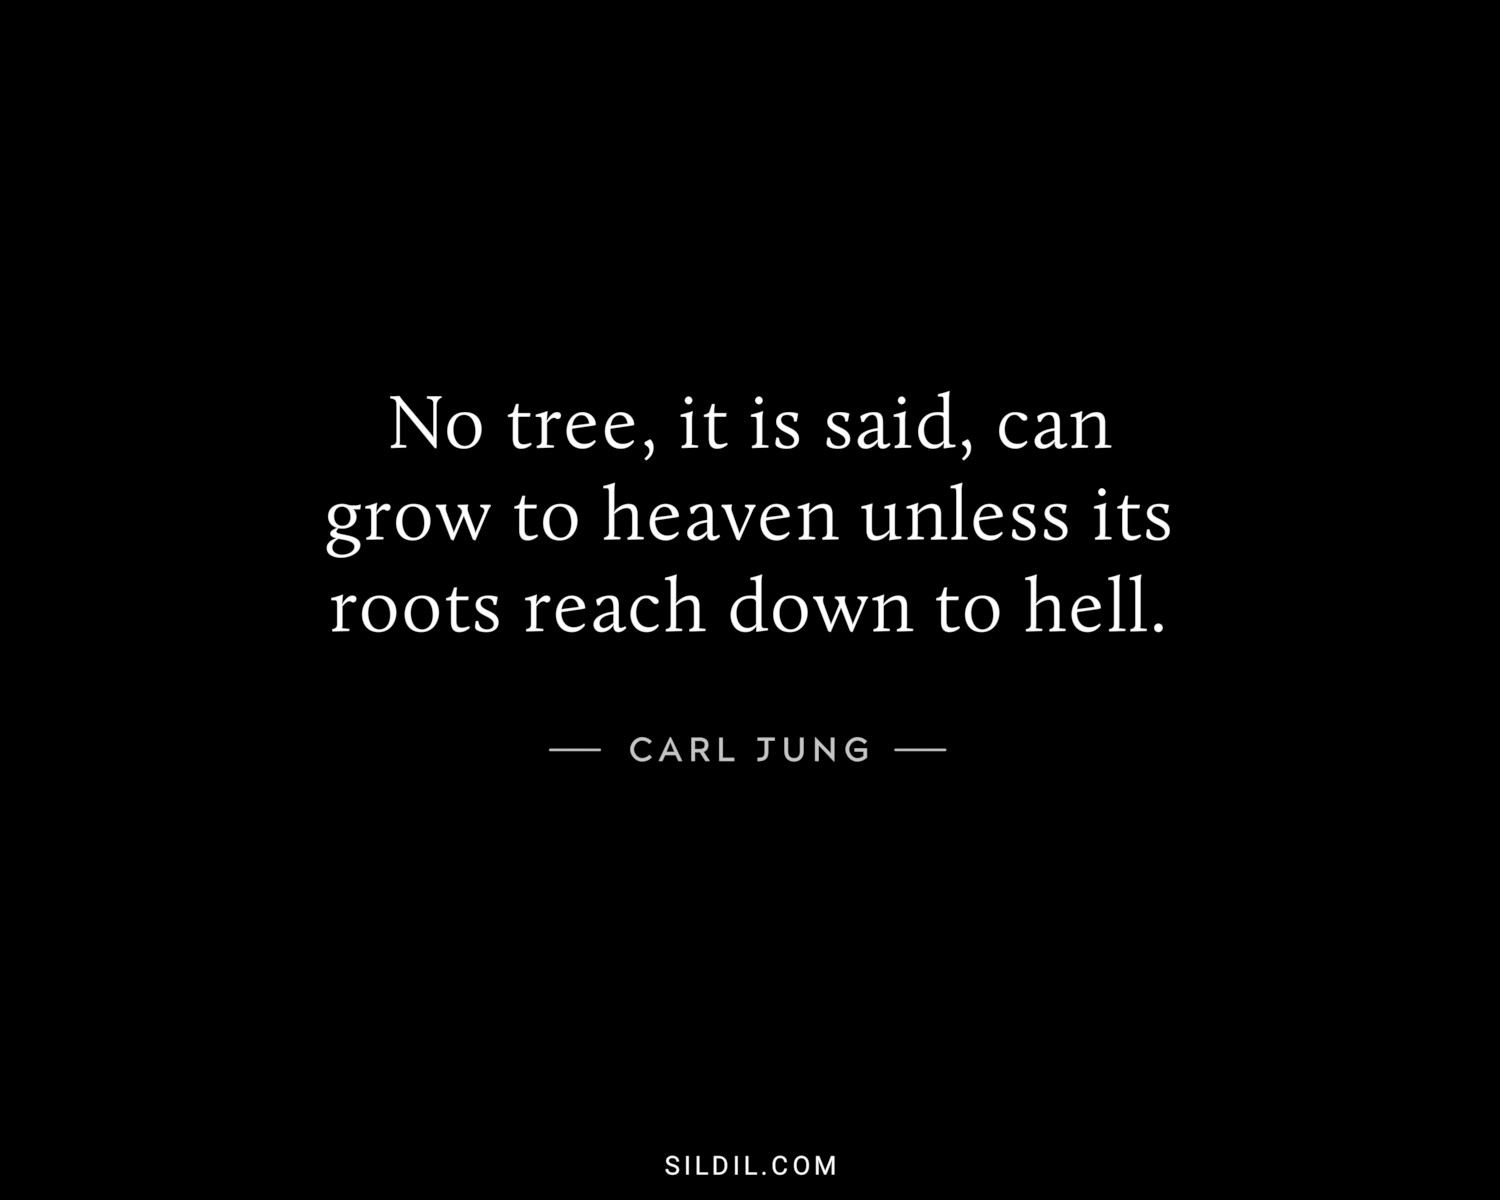 No tree, it is said, can grow to heaven unless its roots reach down to hell.